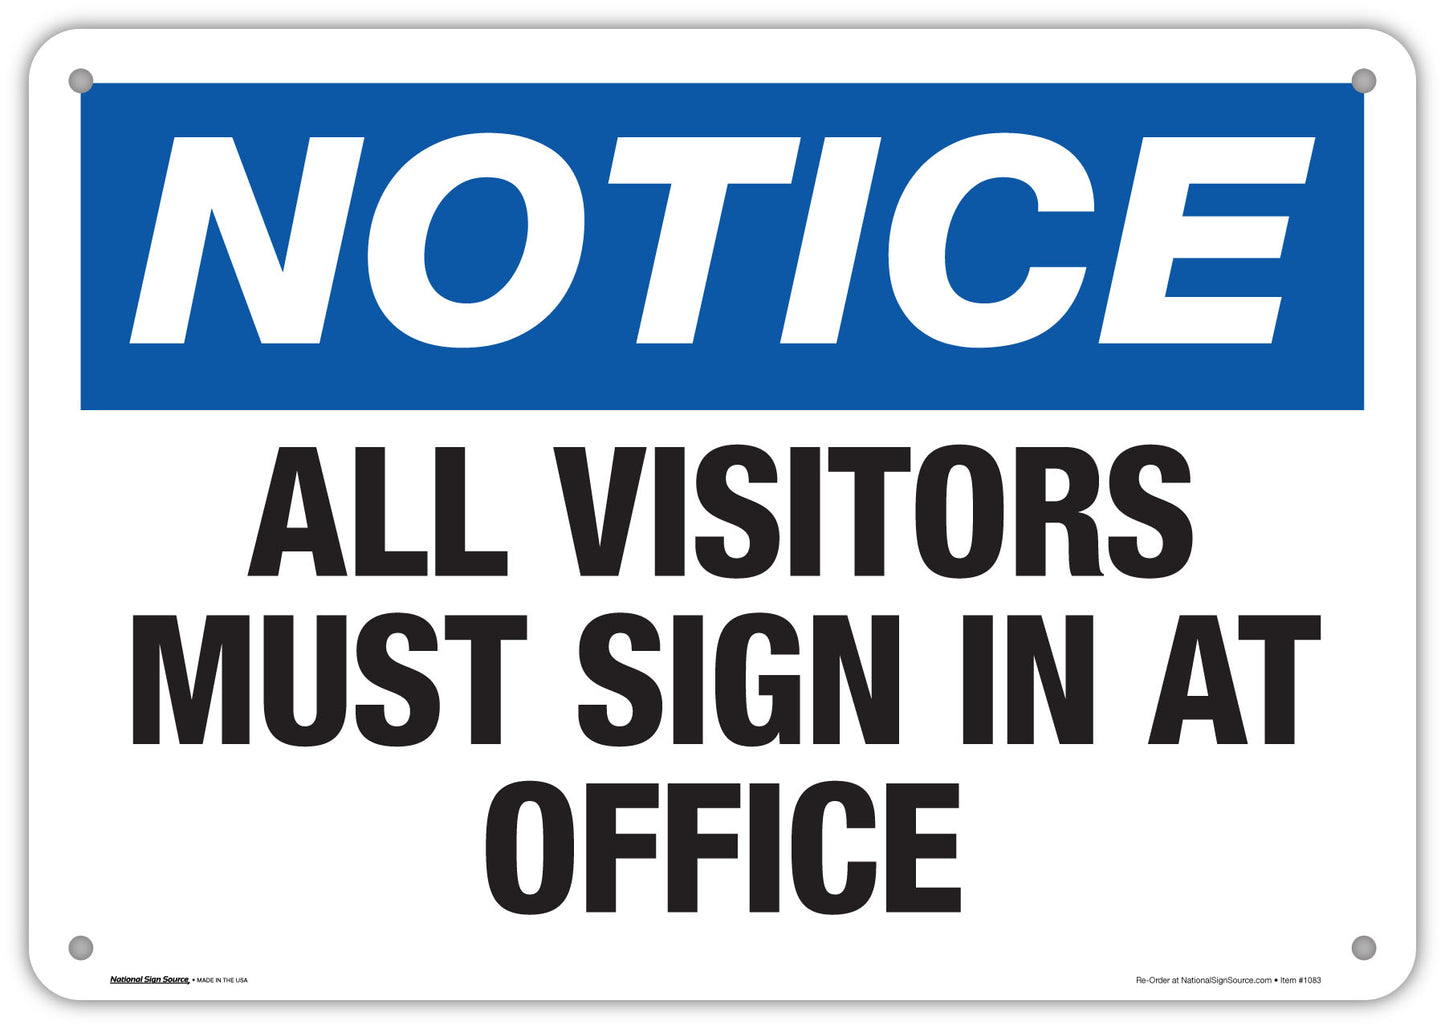 Notice all visitors must sign in at office aluminum signs and vinyl sticker signs.